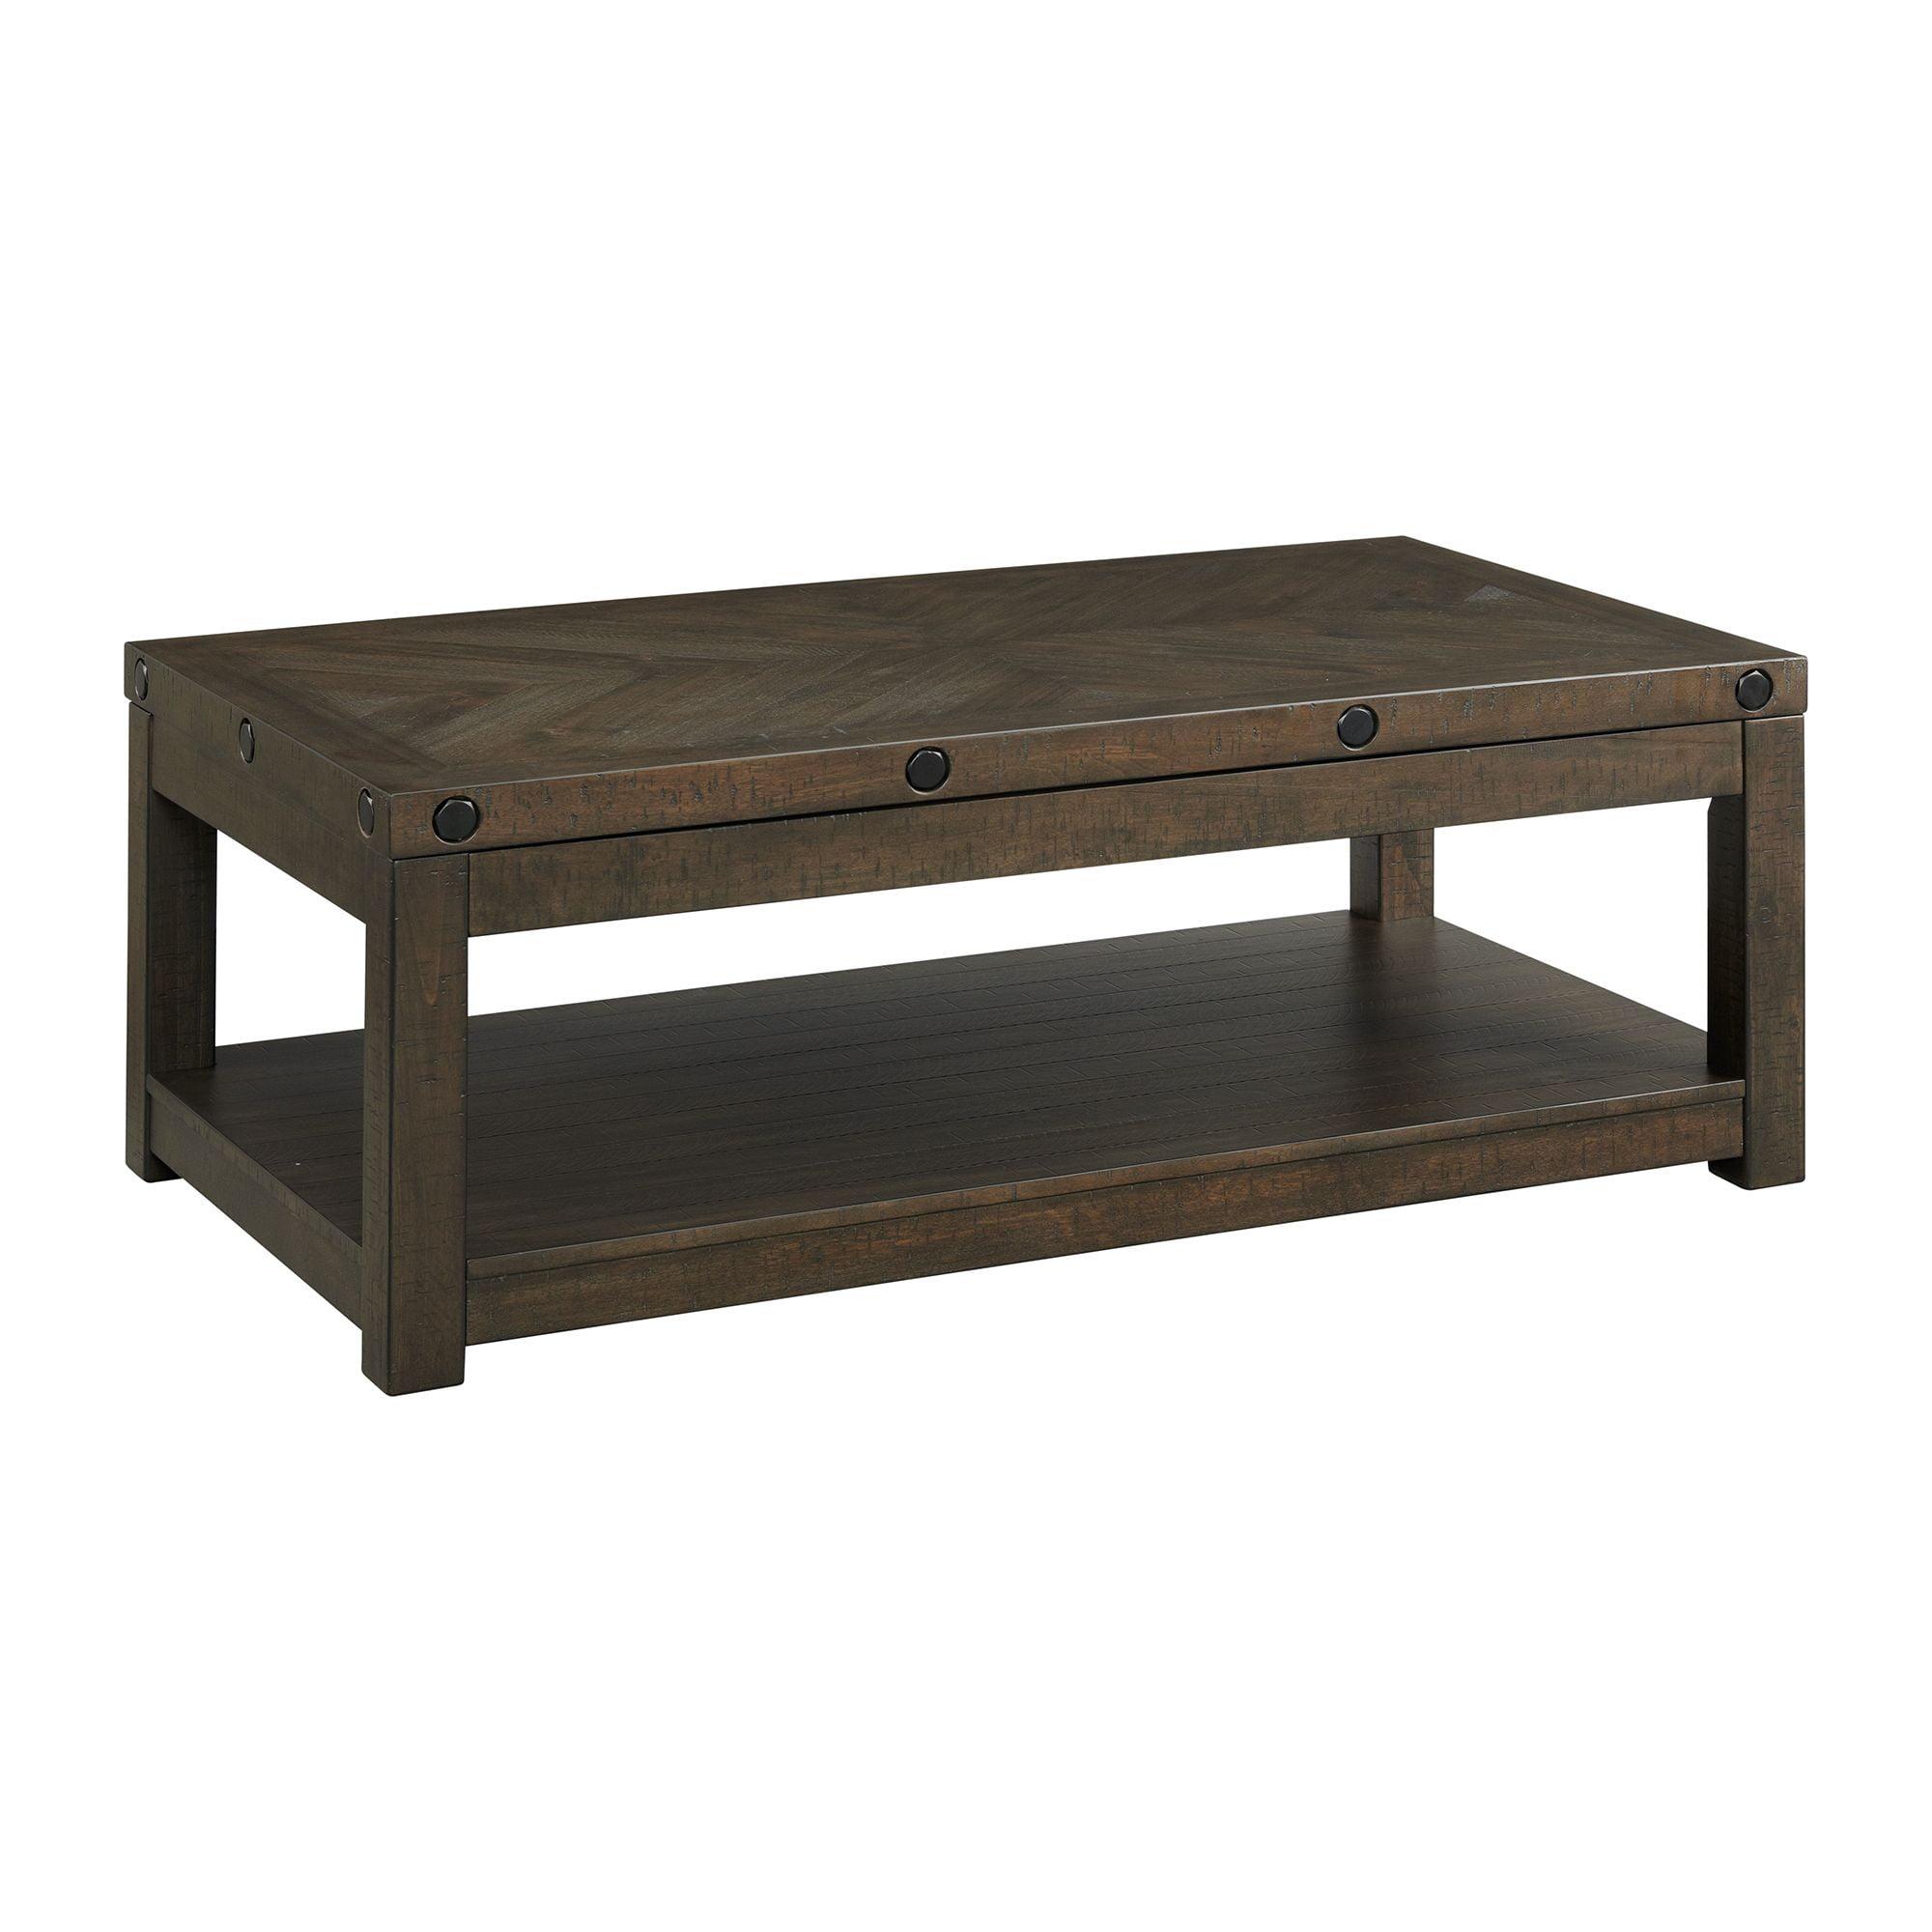 Transitional Charcoal Acacia Wood Rectangular Lift-Top Coffee Table with Storage